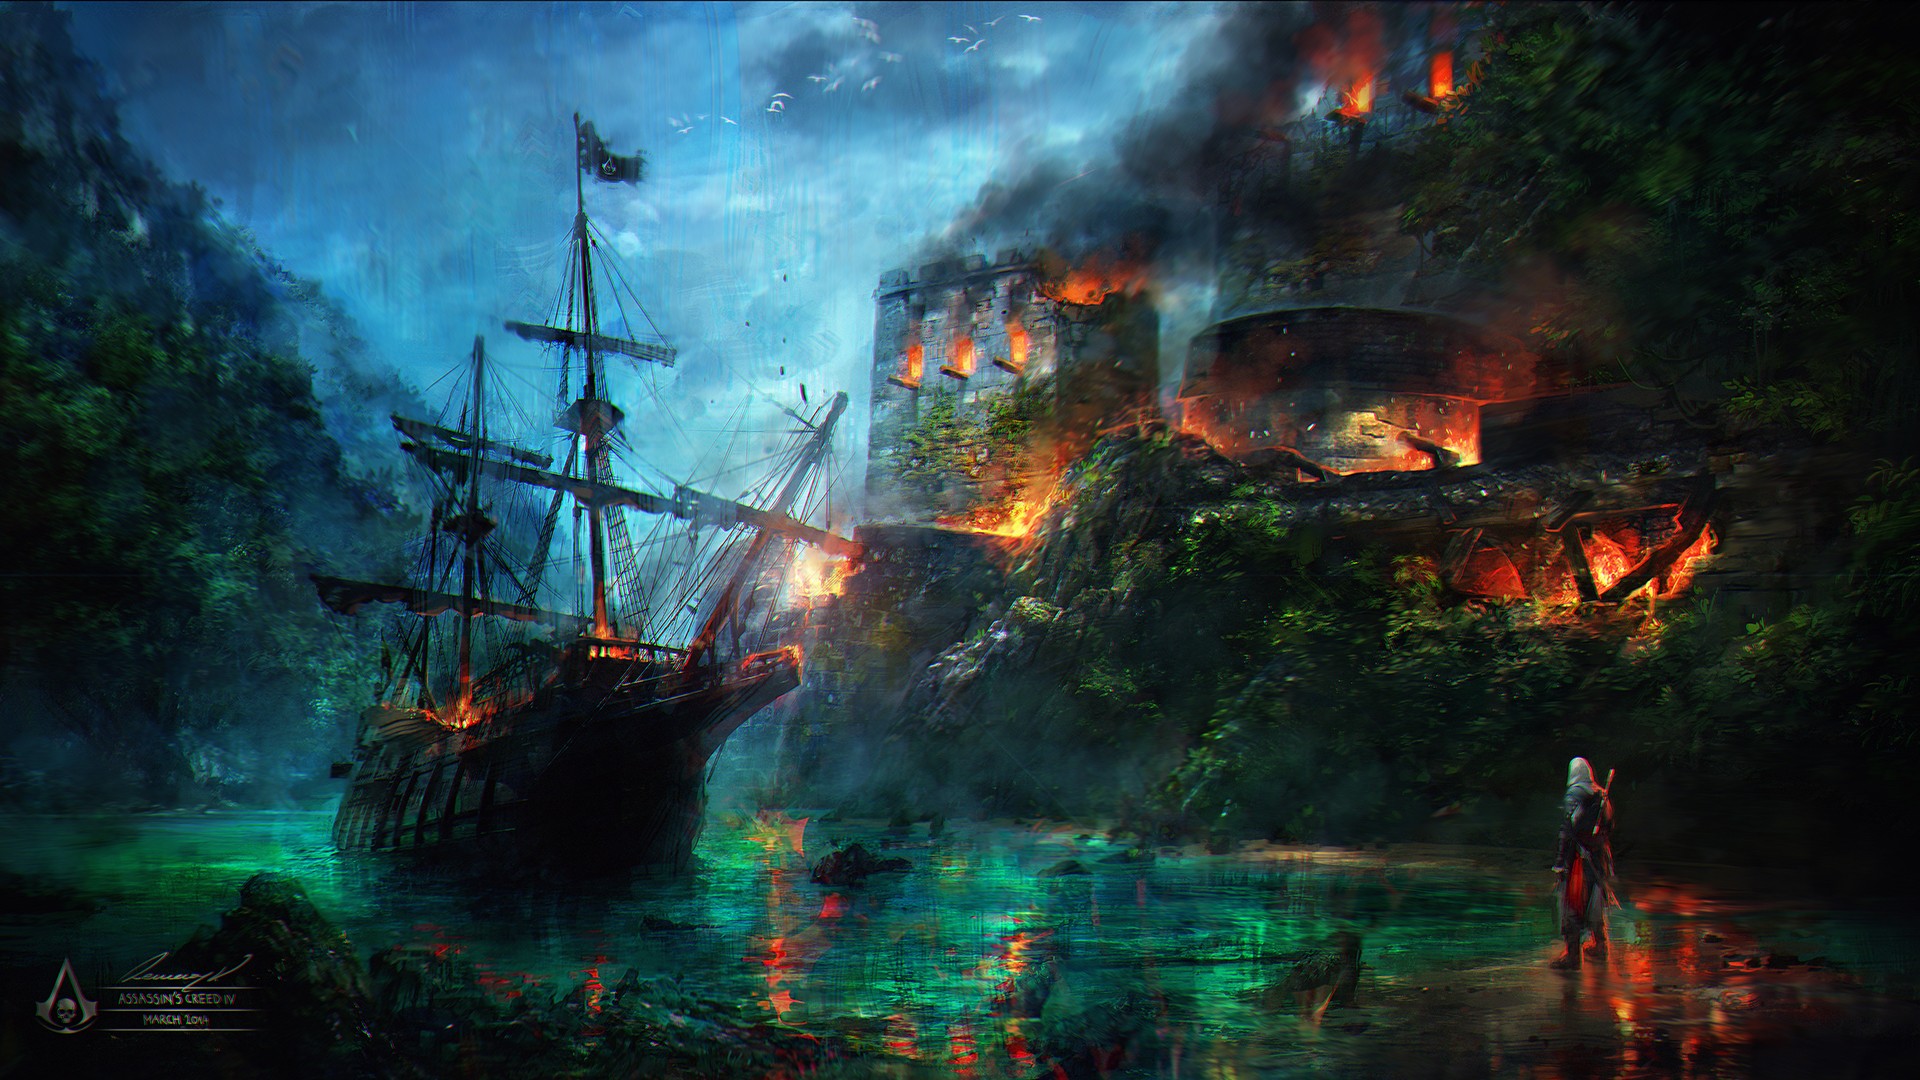 General 1920x1080 Assassin's Creed digital art boat Assassin's Creed: Black Flag ship castle water assassins  video games video game art fire burning sailing ship vehicle PC gaming